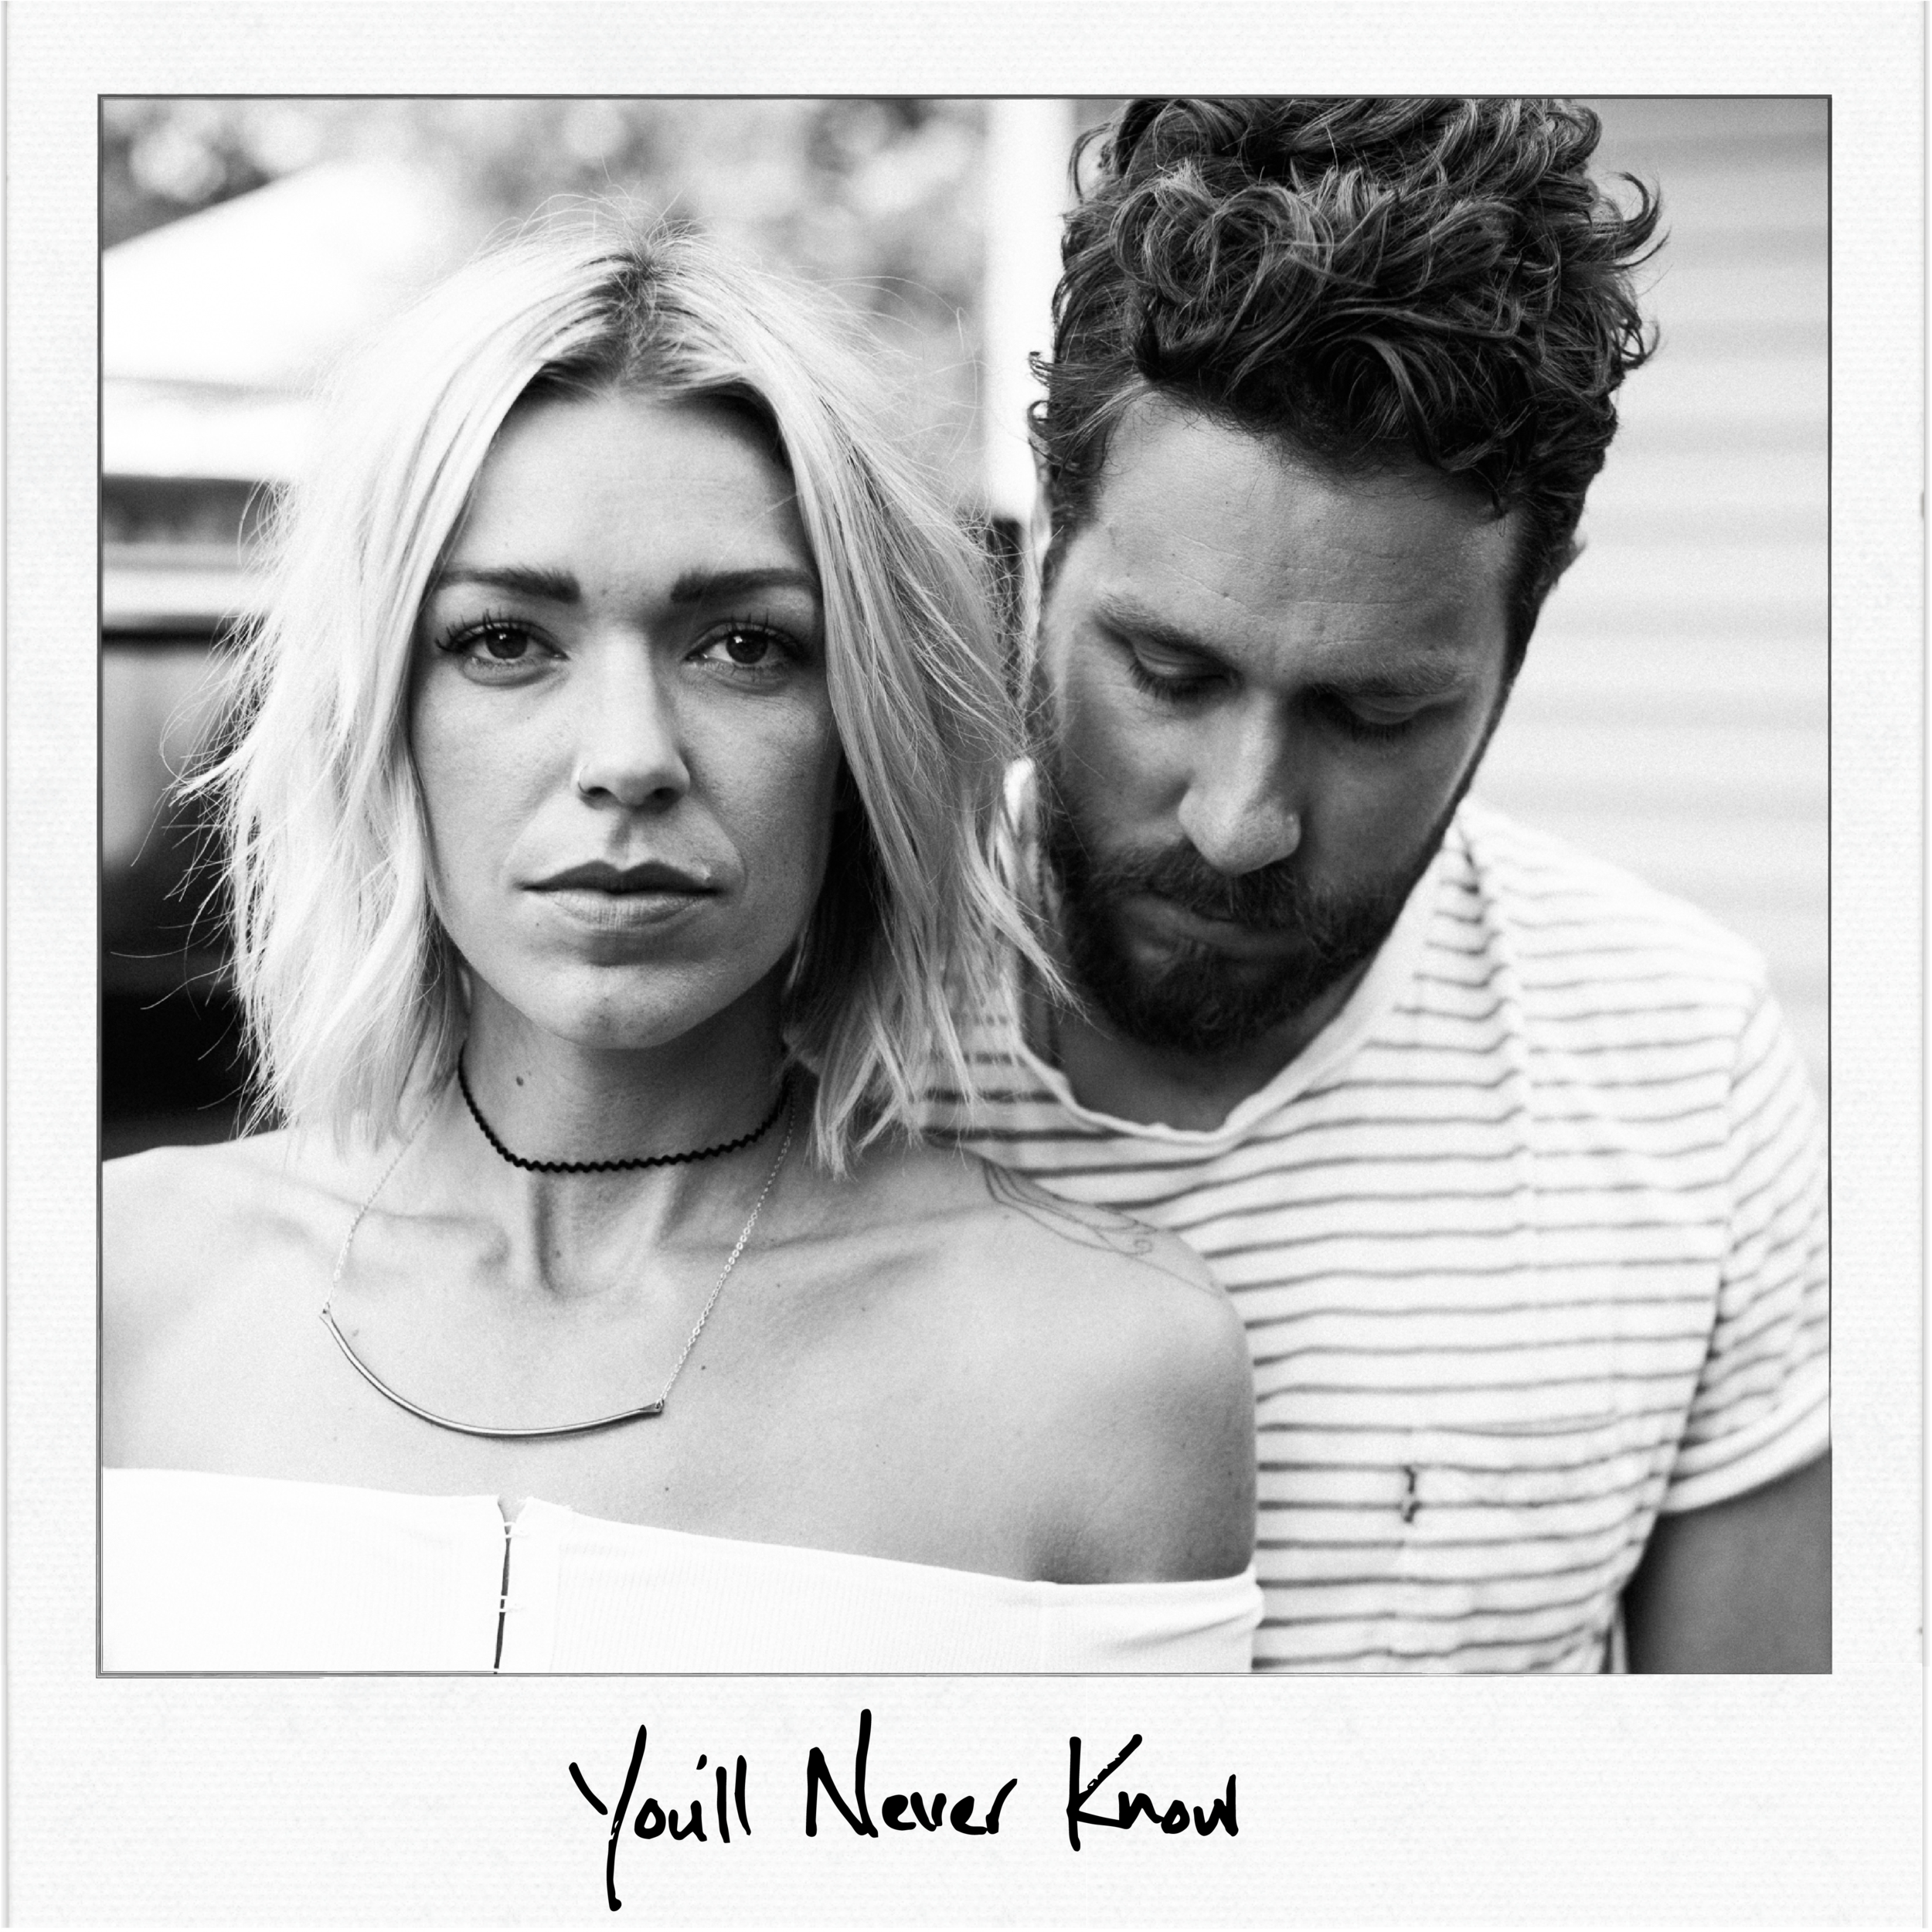 Youll Never Know - Cover Art-01 2.png